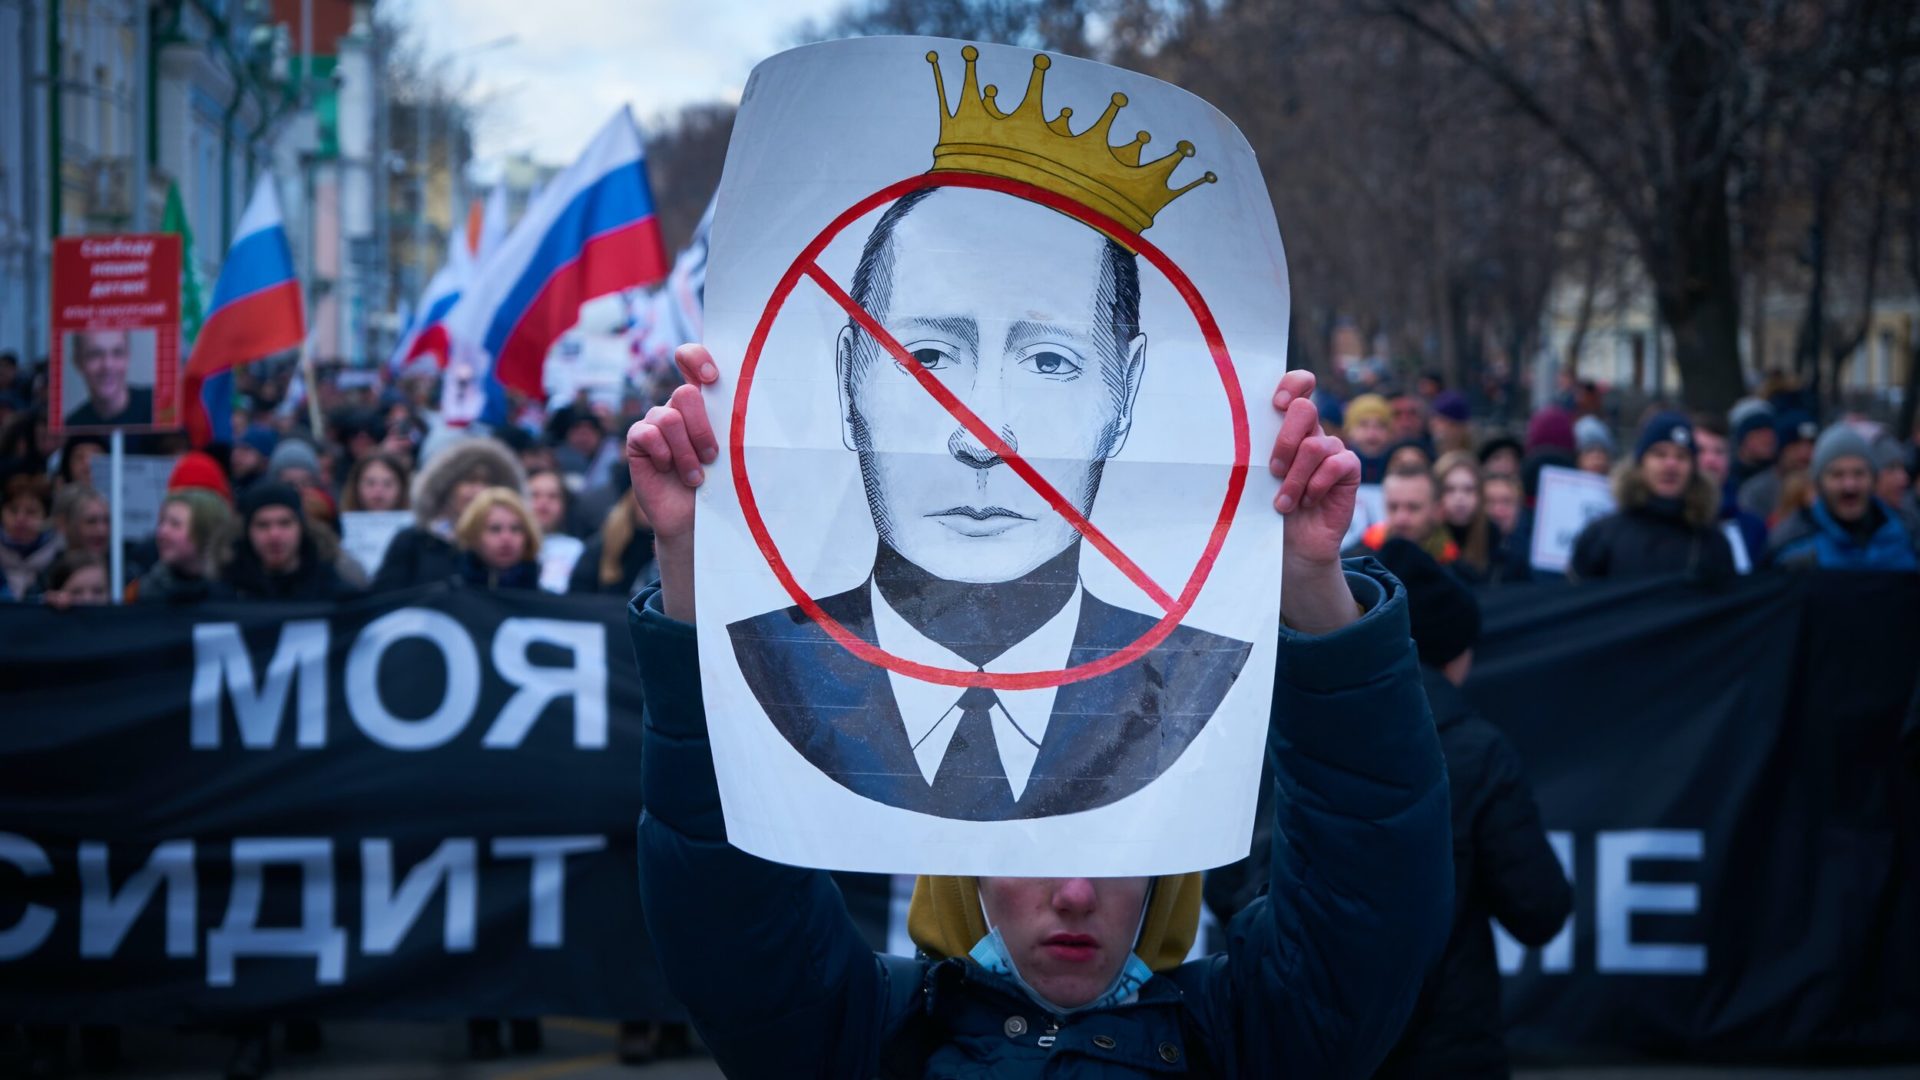 March 5, 2021 – Russian citizens protest the arrest of Alexei Nevalny, a political opposition leader, who was detained by Vladimir Putin’s government in late January. (Photo by Valery Tenevoy | Unsplash)